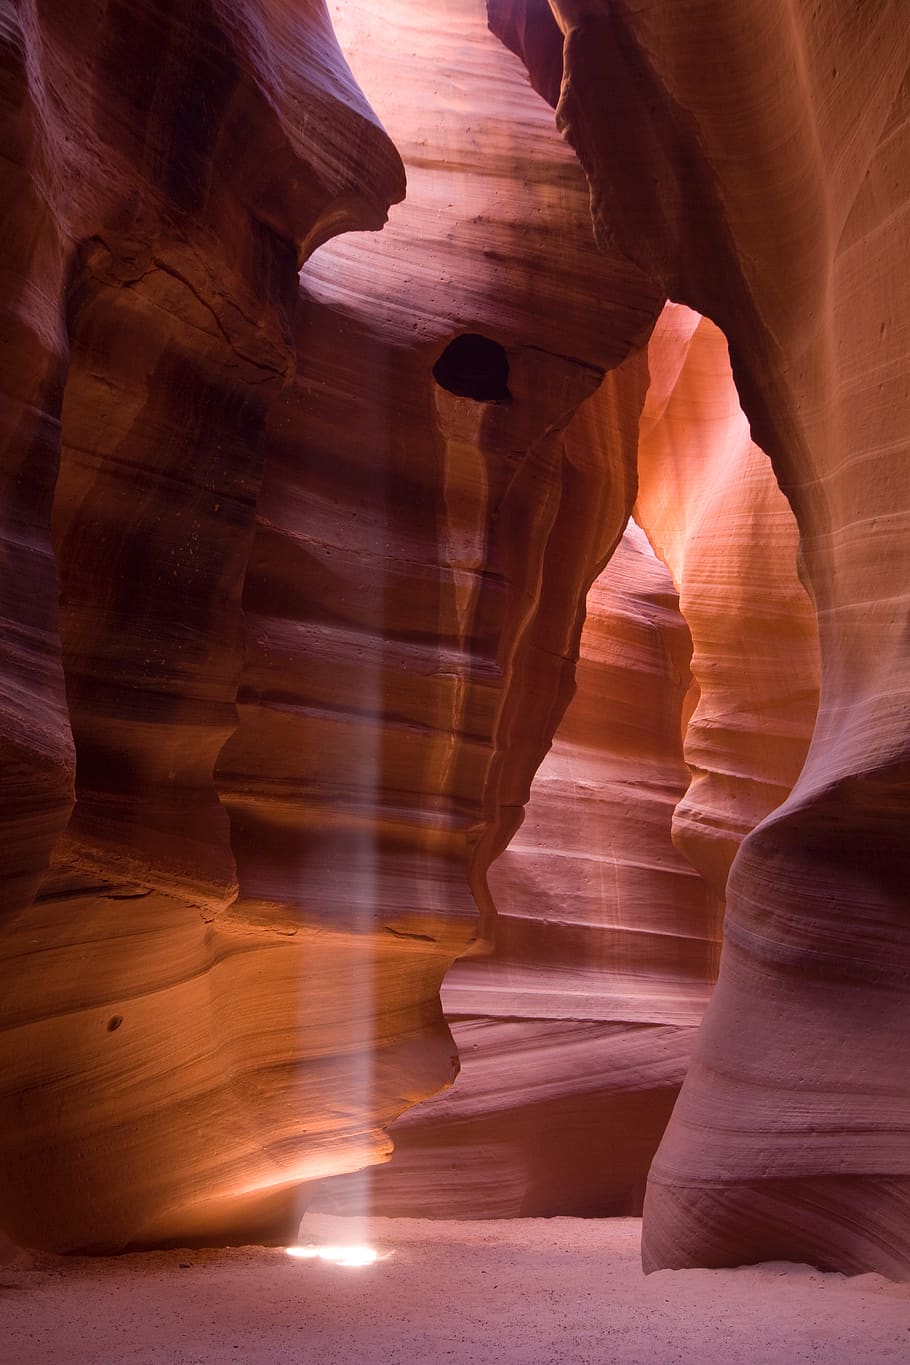 antelope canyon, canyon, sand, carving, erosion, water, glacier, flood, hourglass, time